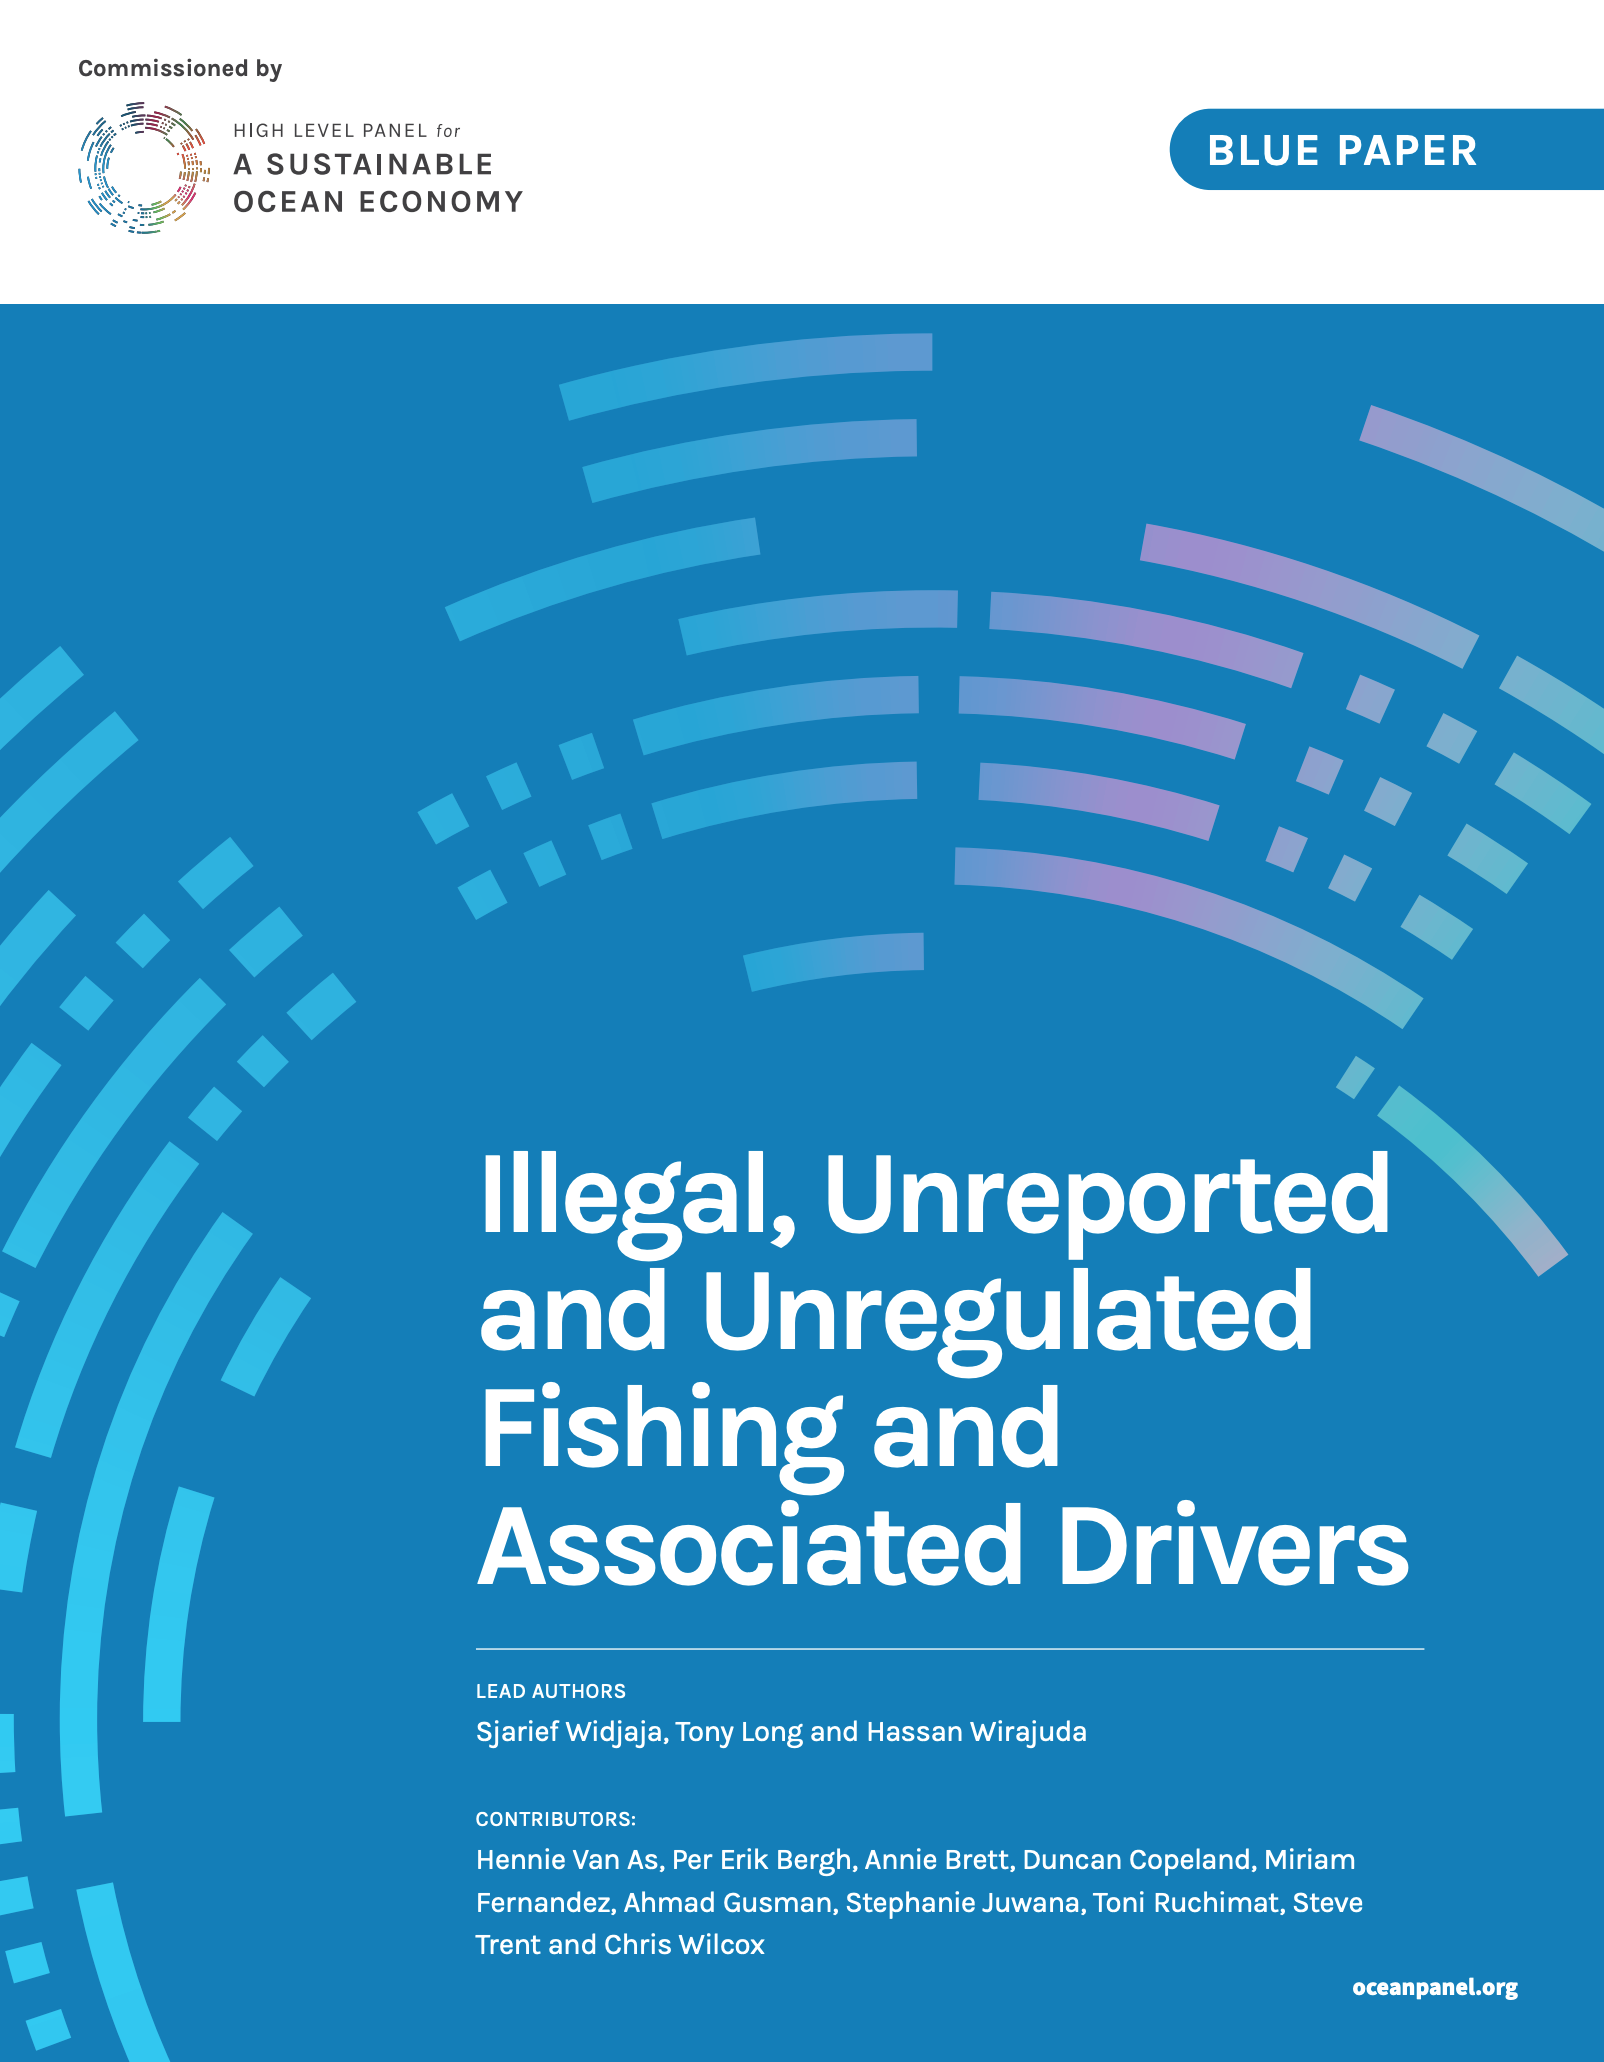 Illegal, Unreported, and Unregulated Fishing and Associated Drivers